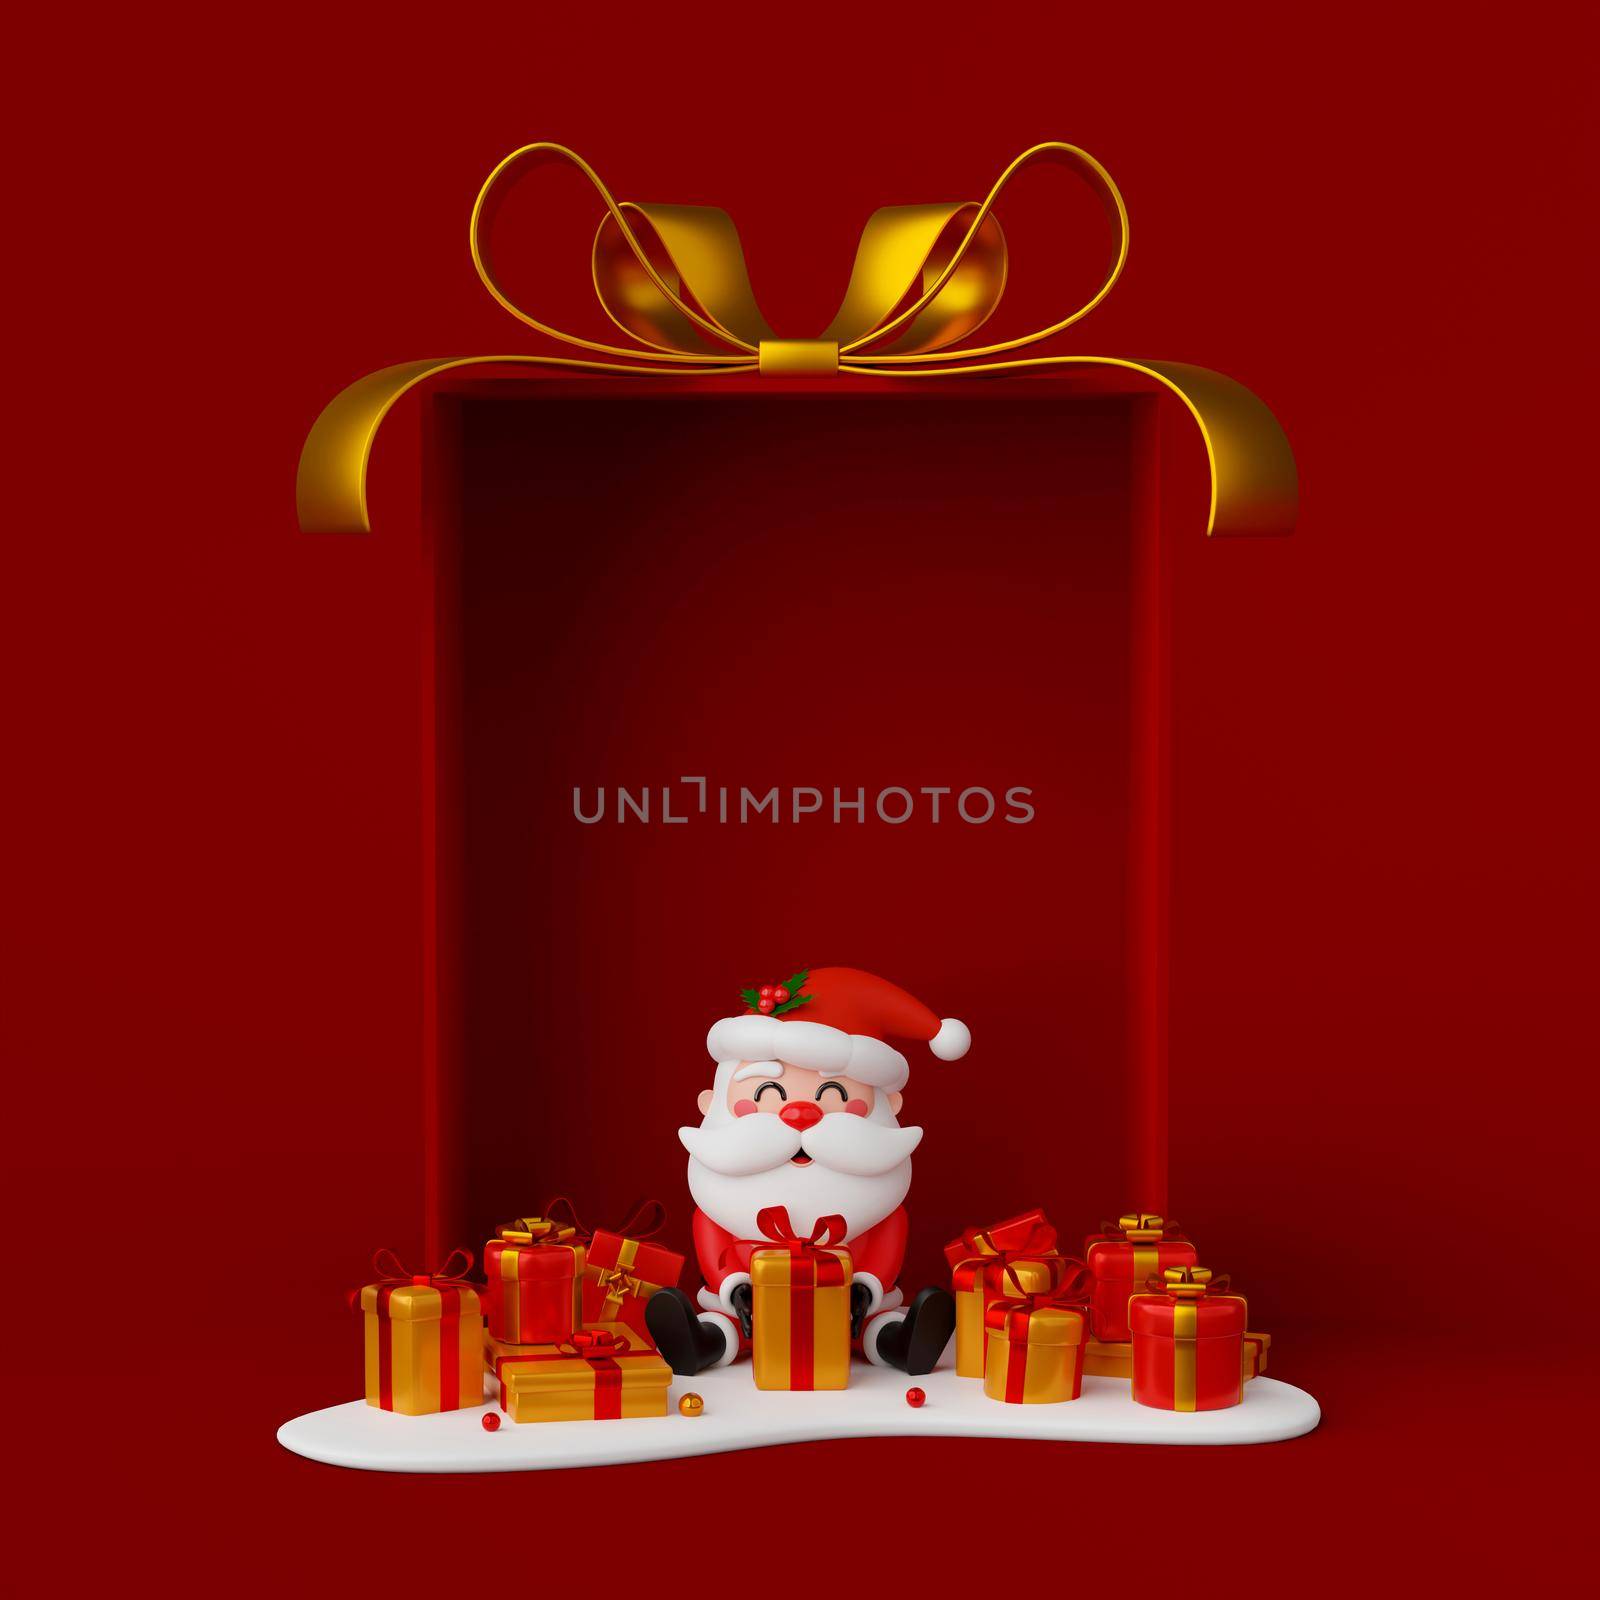 Santa Claus with Christmas gift in big gift box, 3d illustration by nutzchotwarut